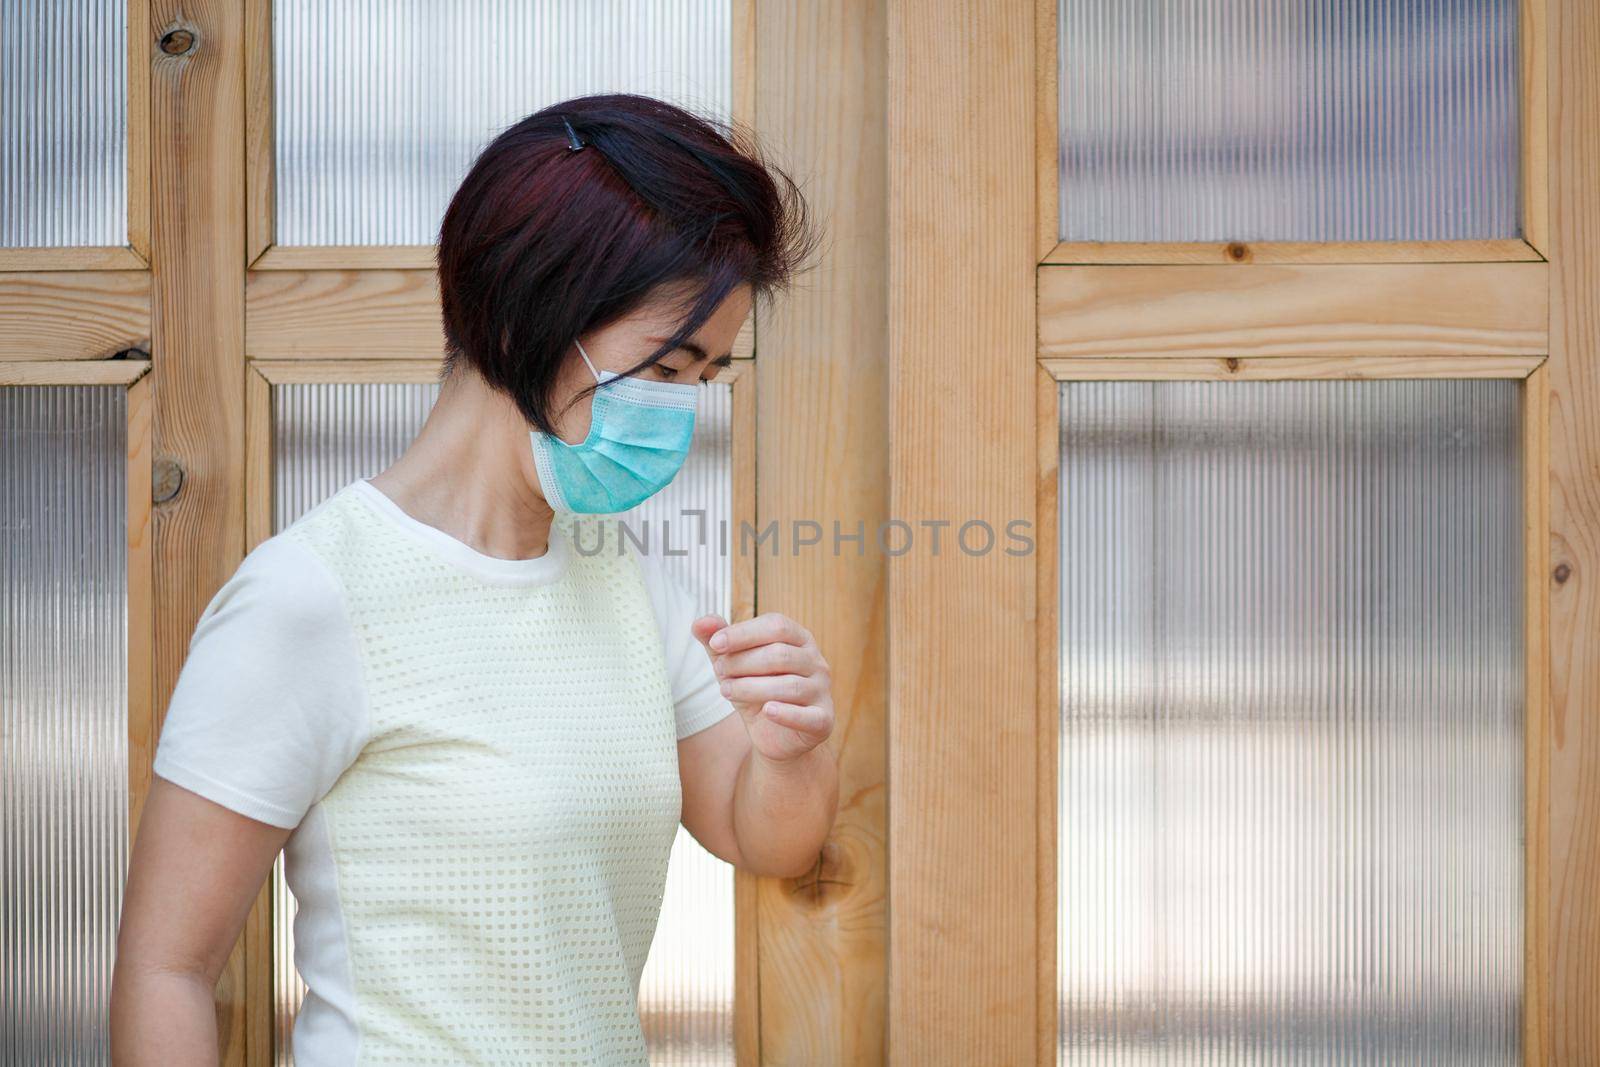 Woman wearing mask opening the door with the elbow for protection  infection COVID-19